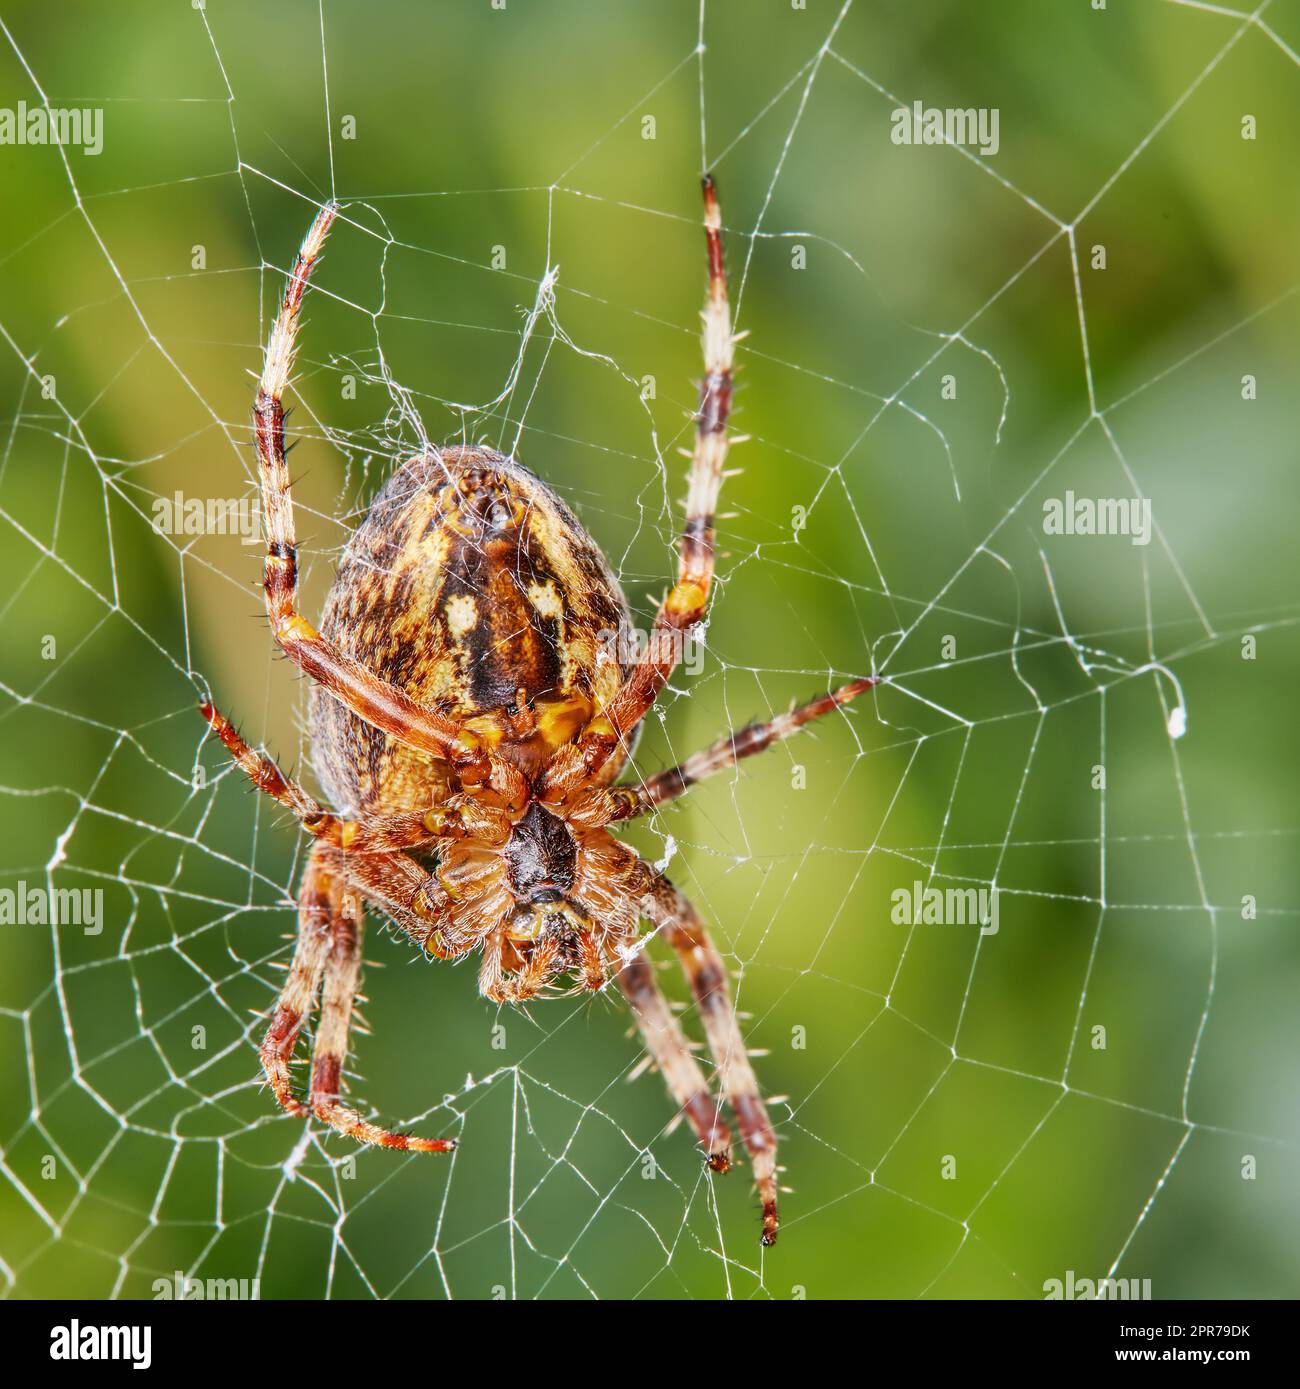 Closeup of a Walnut Orb Weaver spider in a web against blur leafy background in its natural habitat. An eight legged arachnid making a cobweb in nature surrounded by a green tree ecosystem Stock Photo